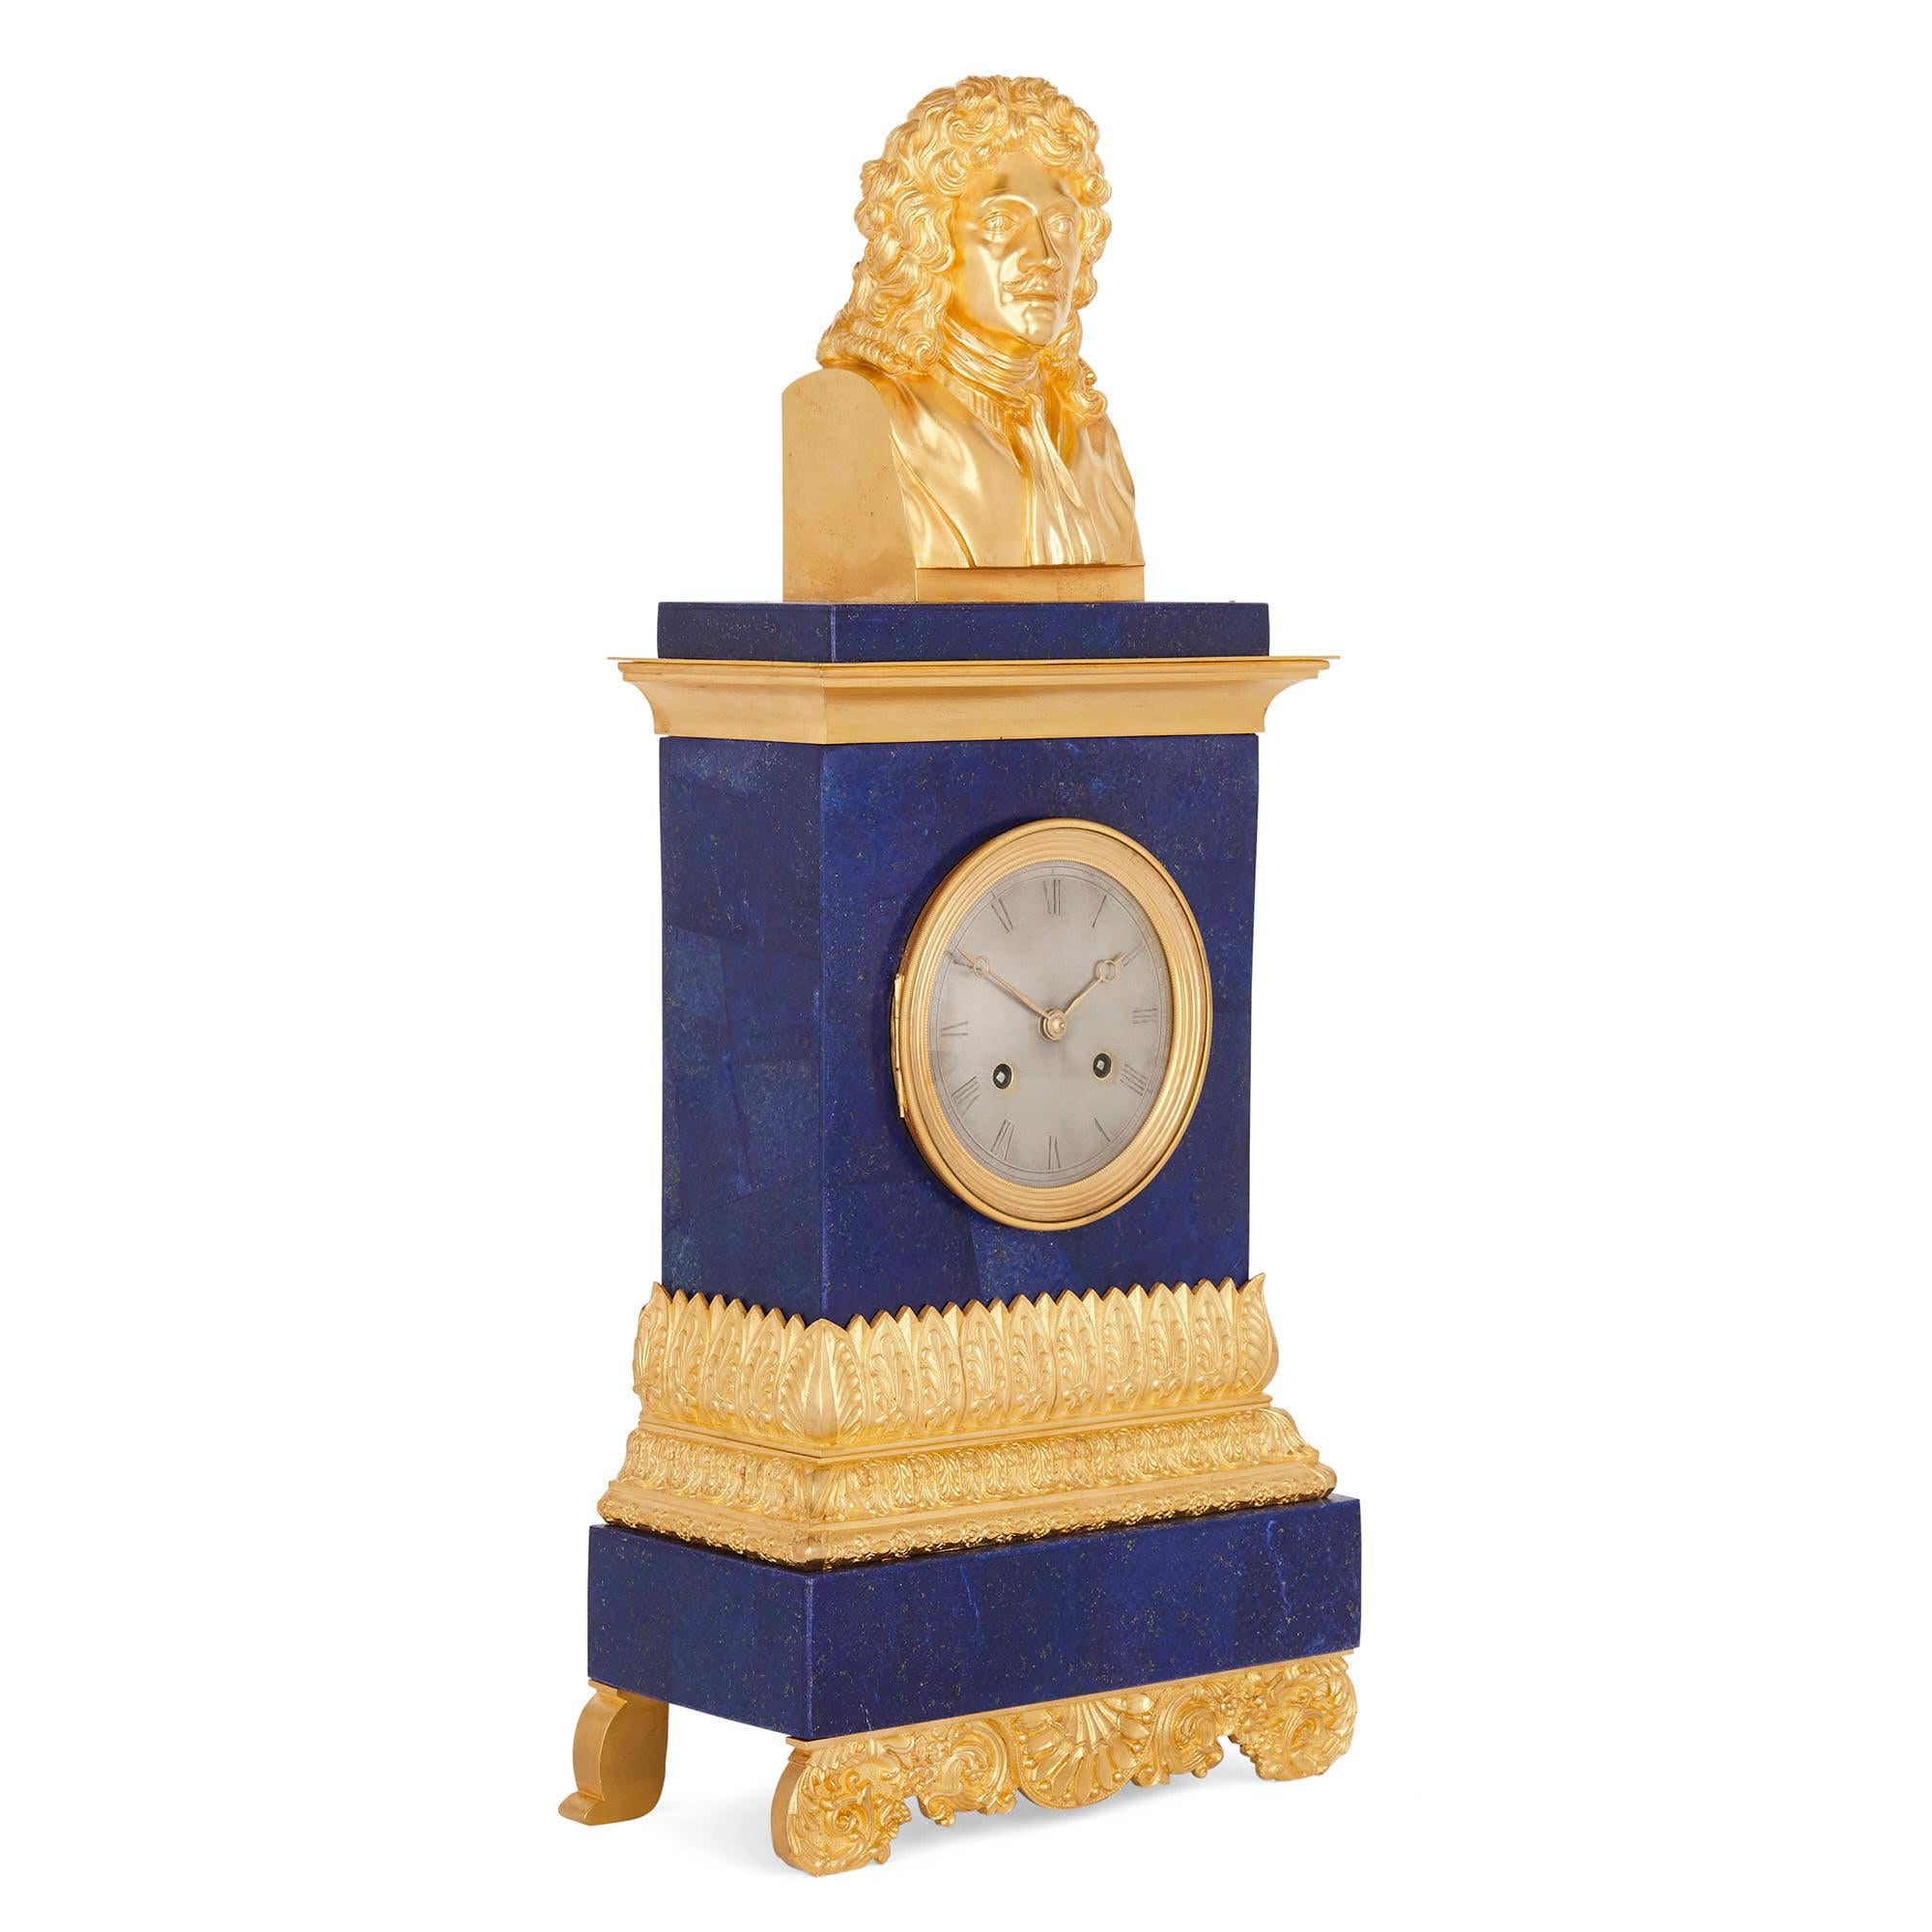 A gilt bronze and blue lapis lazuli clock with bust of Molière
French, circa 1830 
Measures: Height 61cm, width 27cm, depth 13cm

This exquisite French mantel clock originates from circa 1830, and more recently the piece has been veneered in